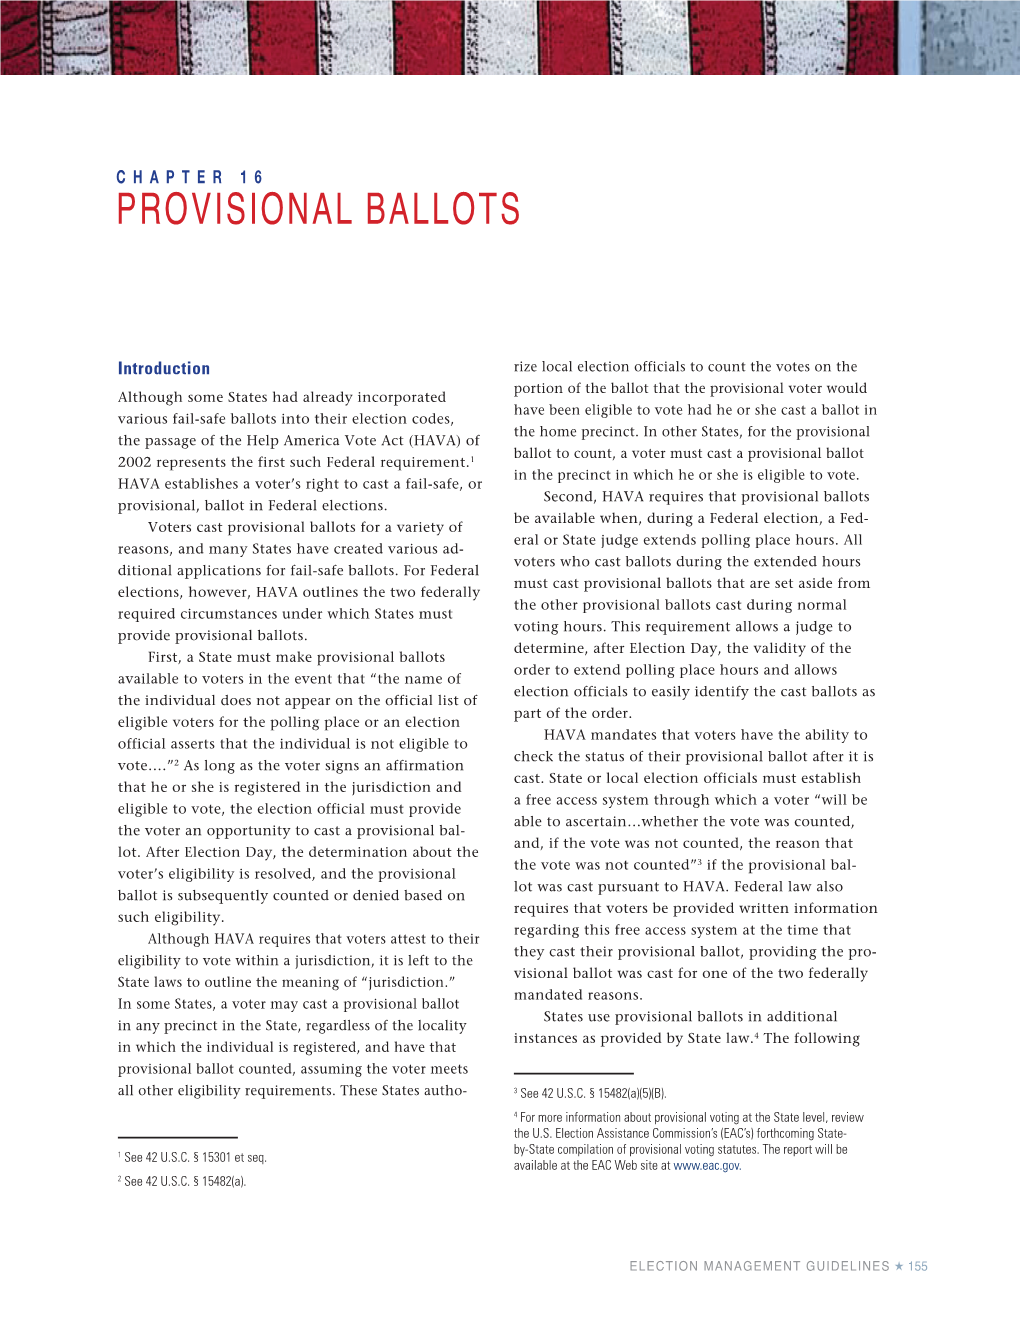 Election Management Guidelines – Provisional Ballots